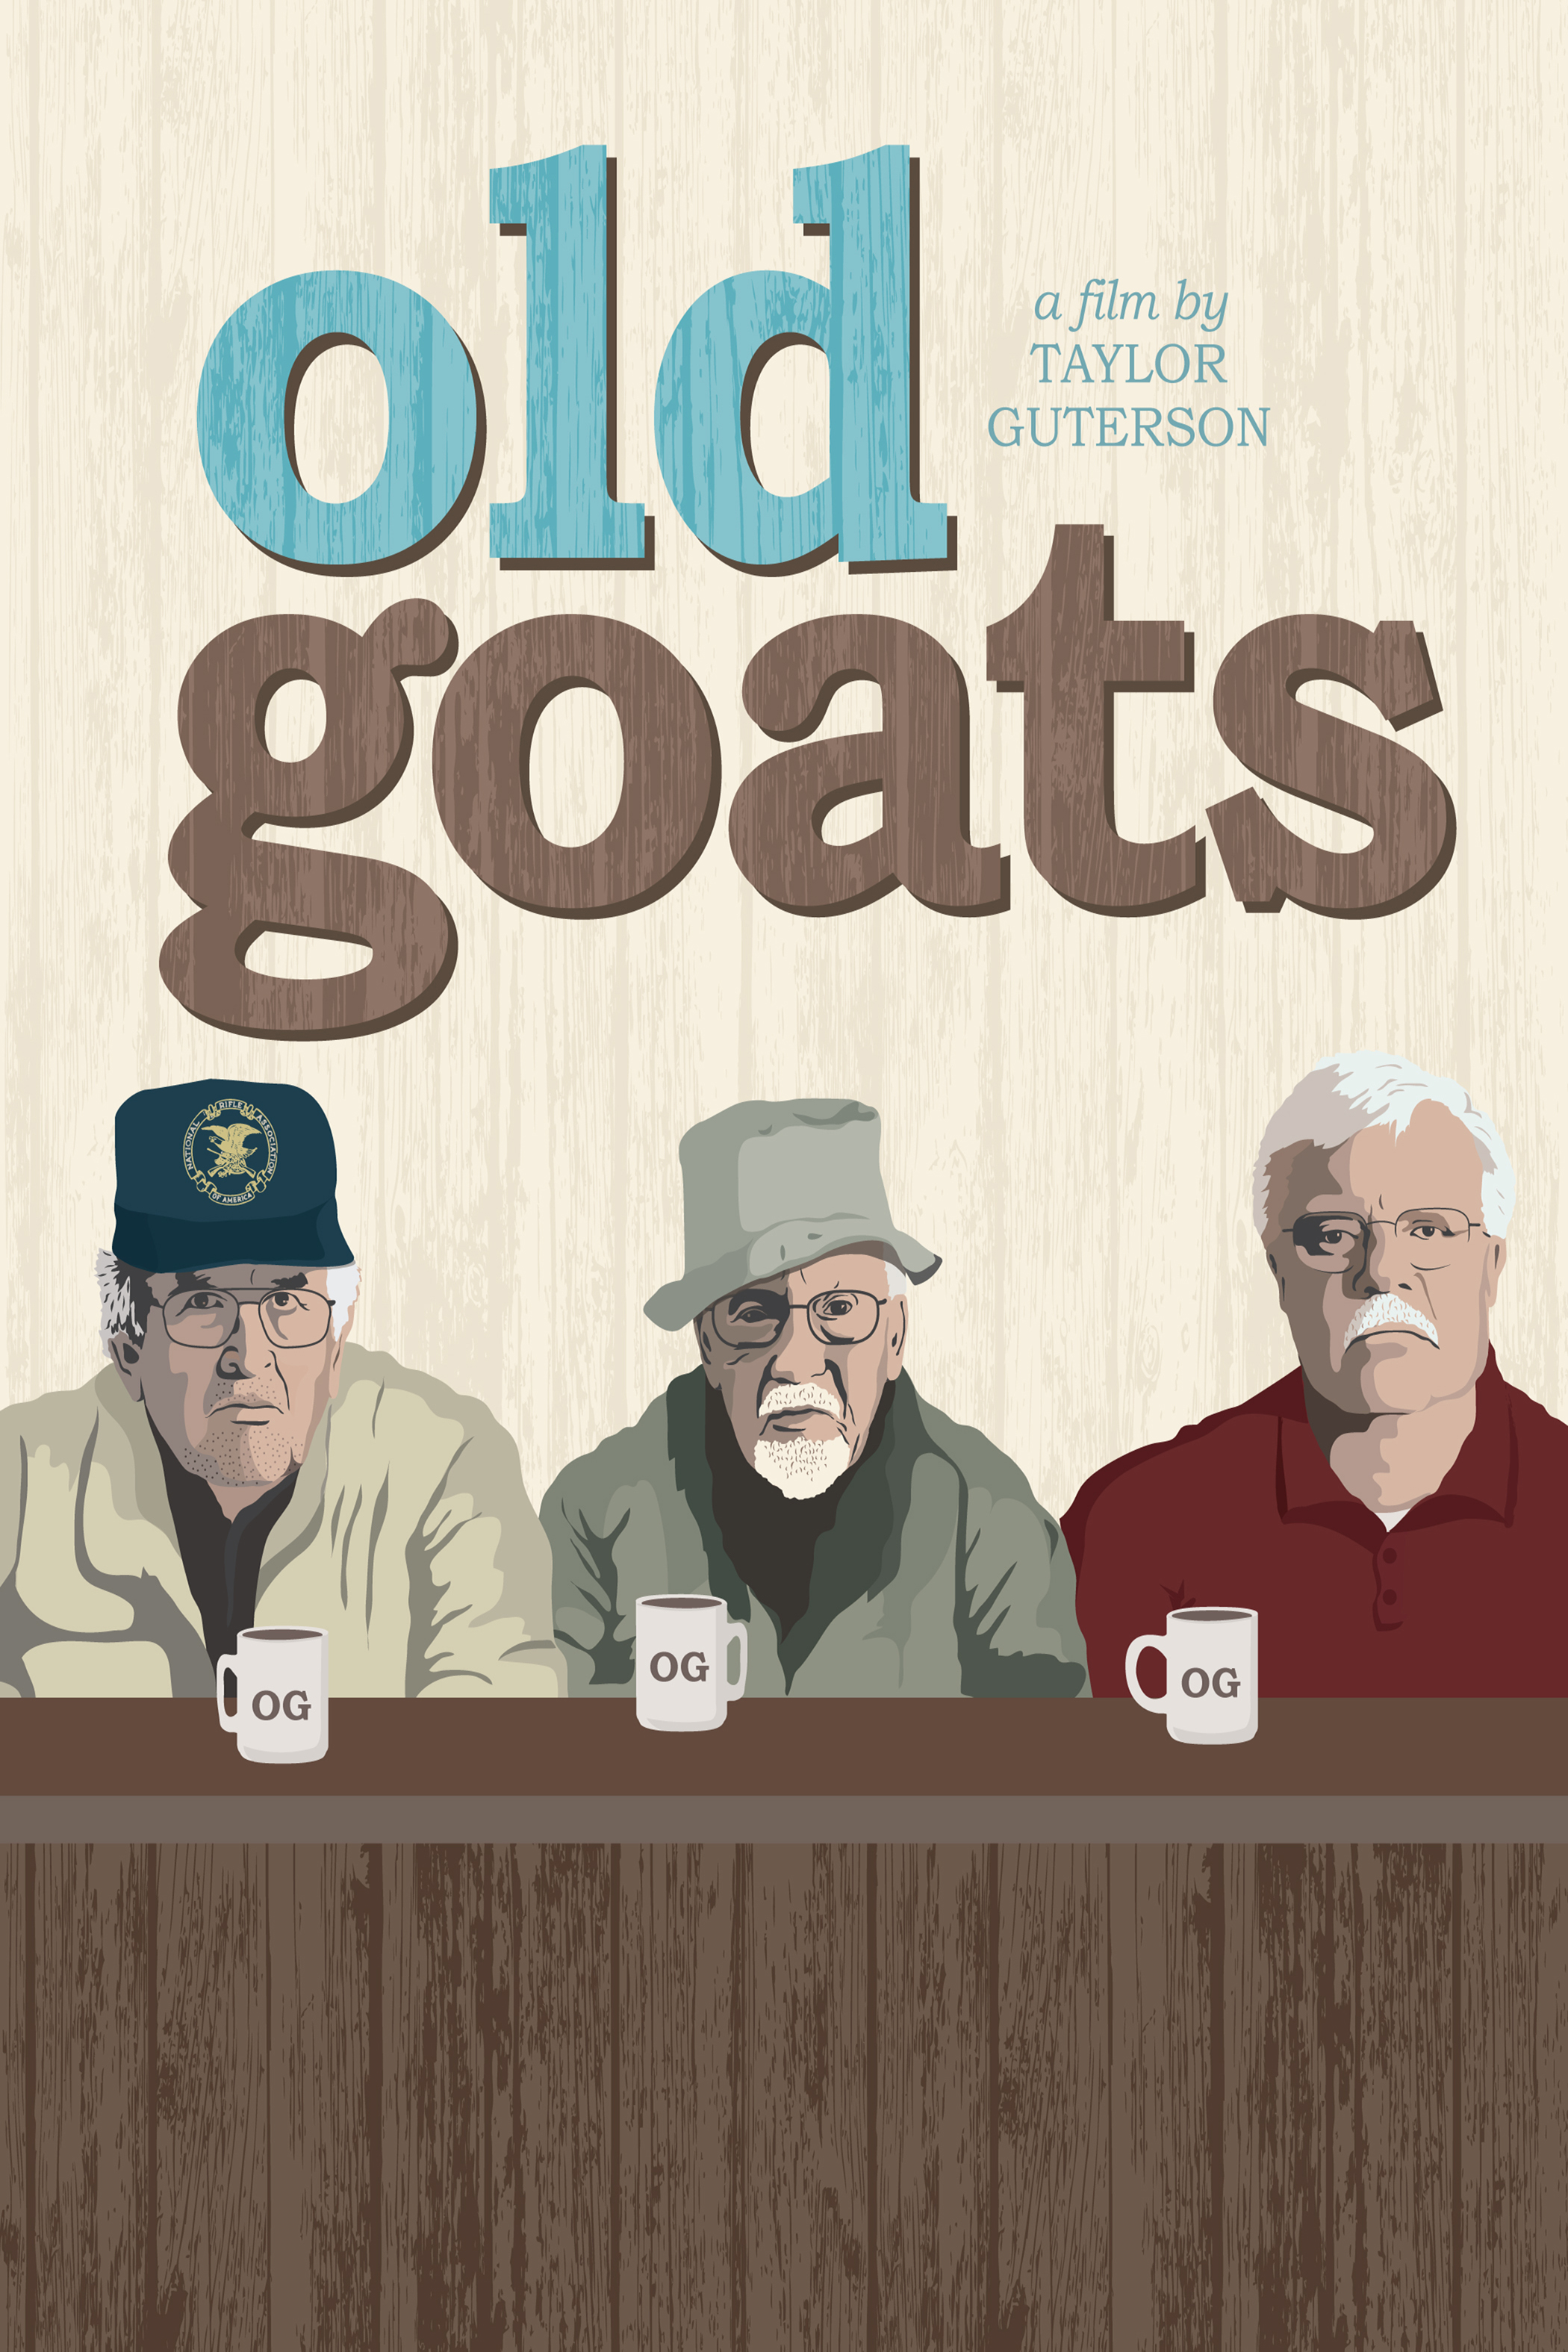 Old Goats